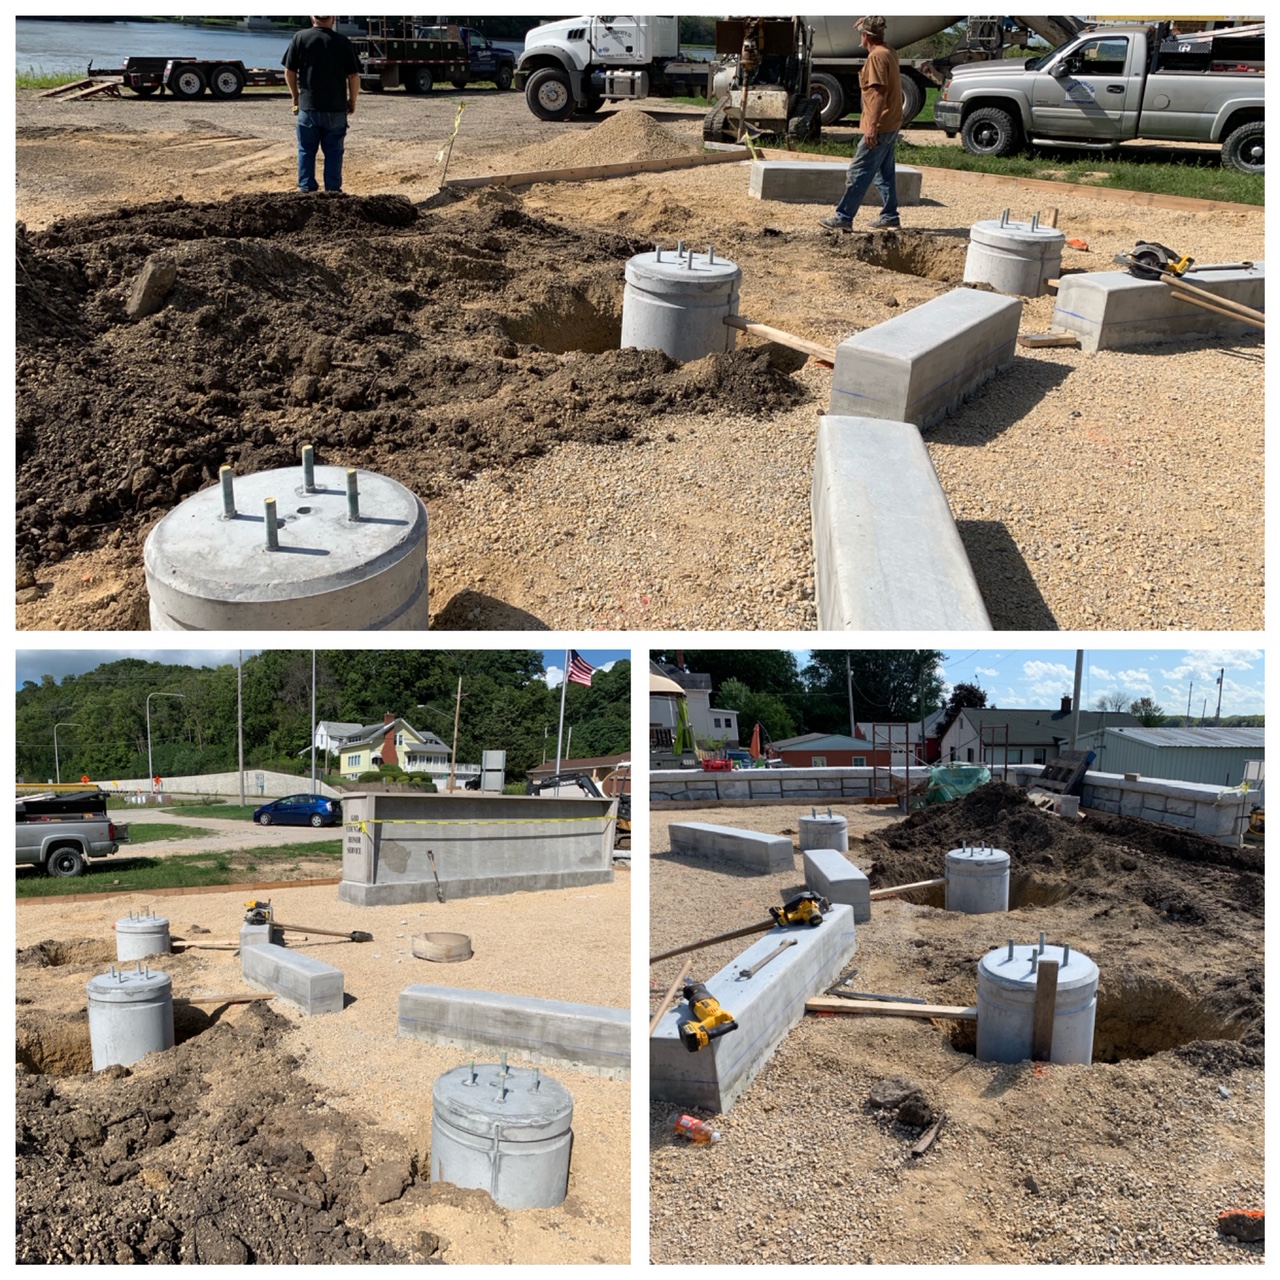 The Flagpole foundations are in place ready to install the flagpoles.